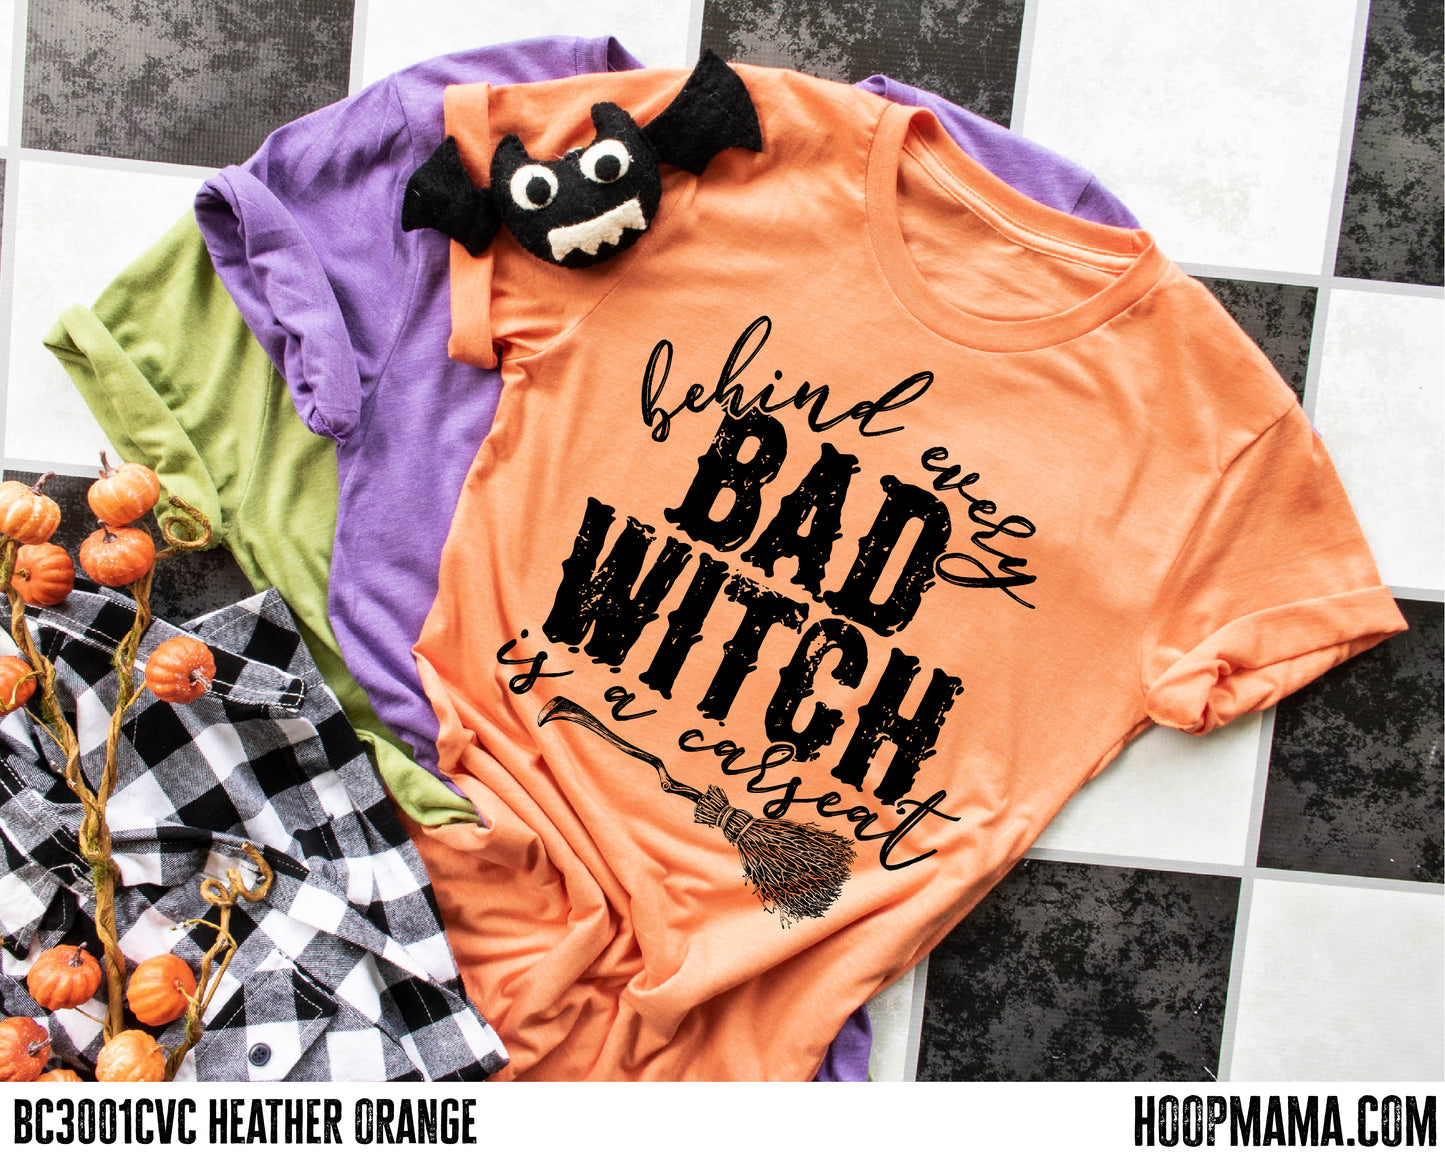 Behind every bad witch